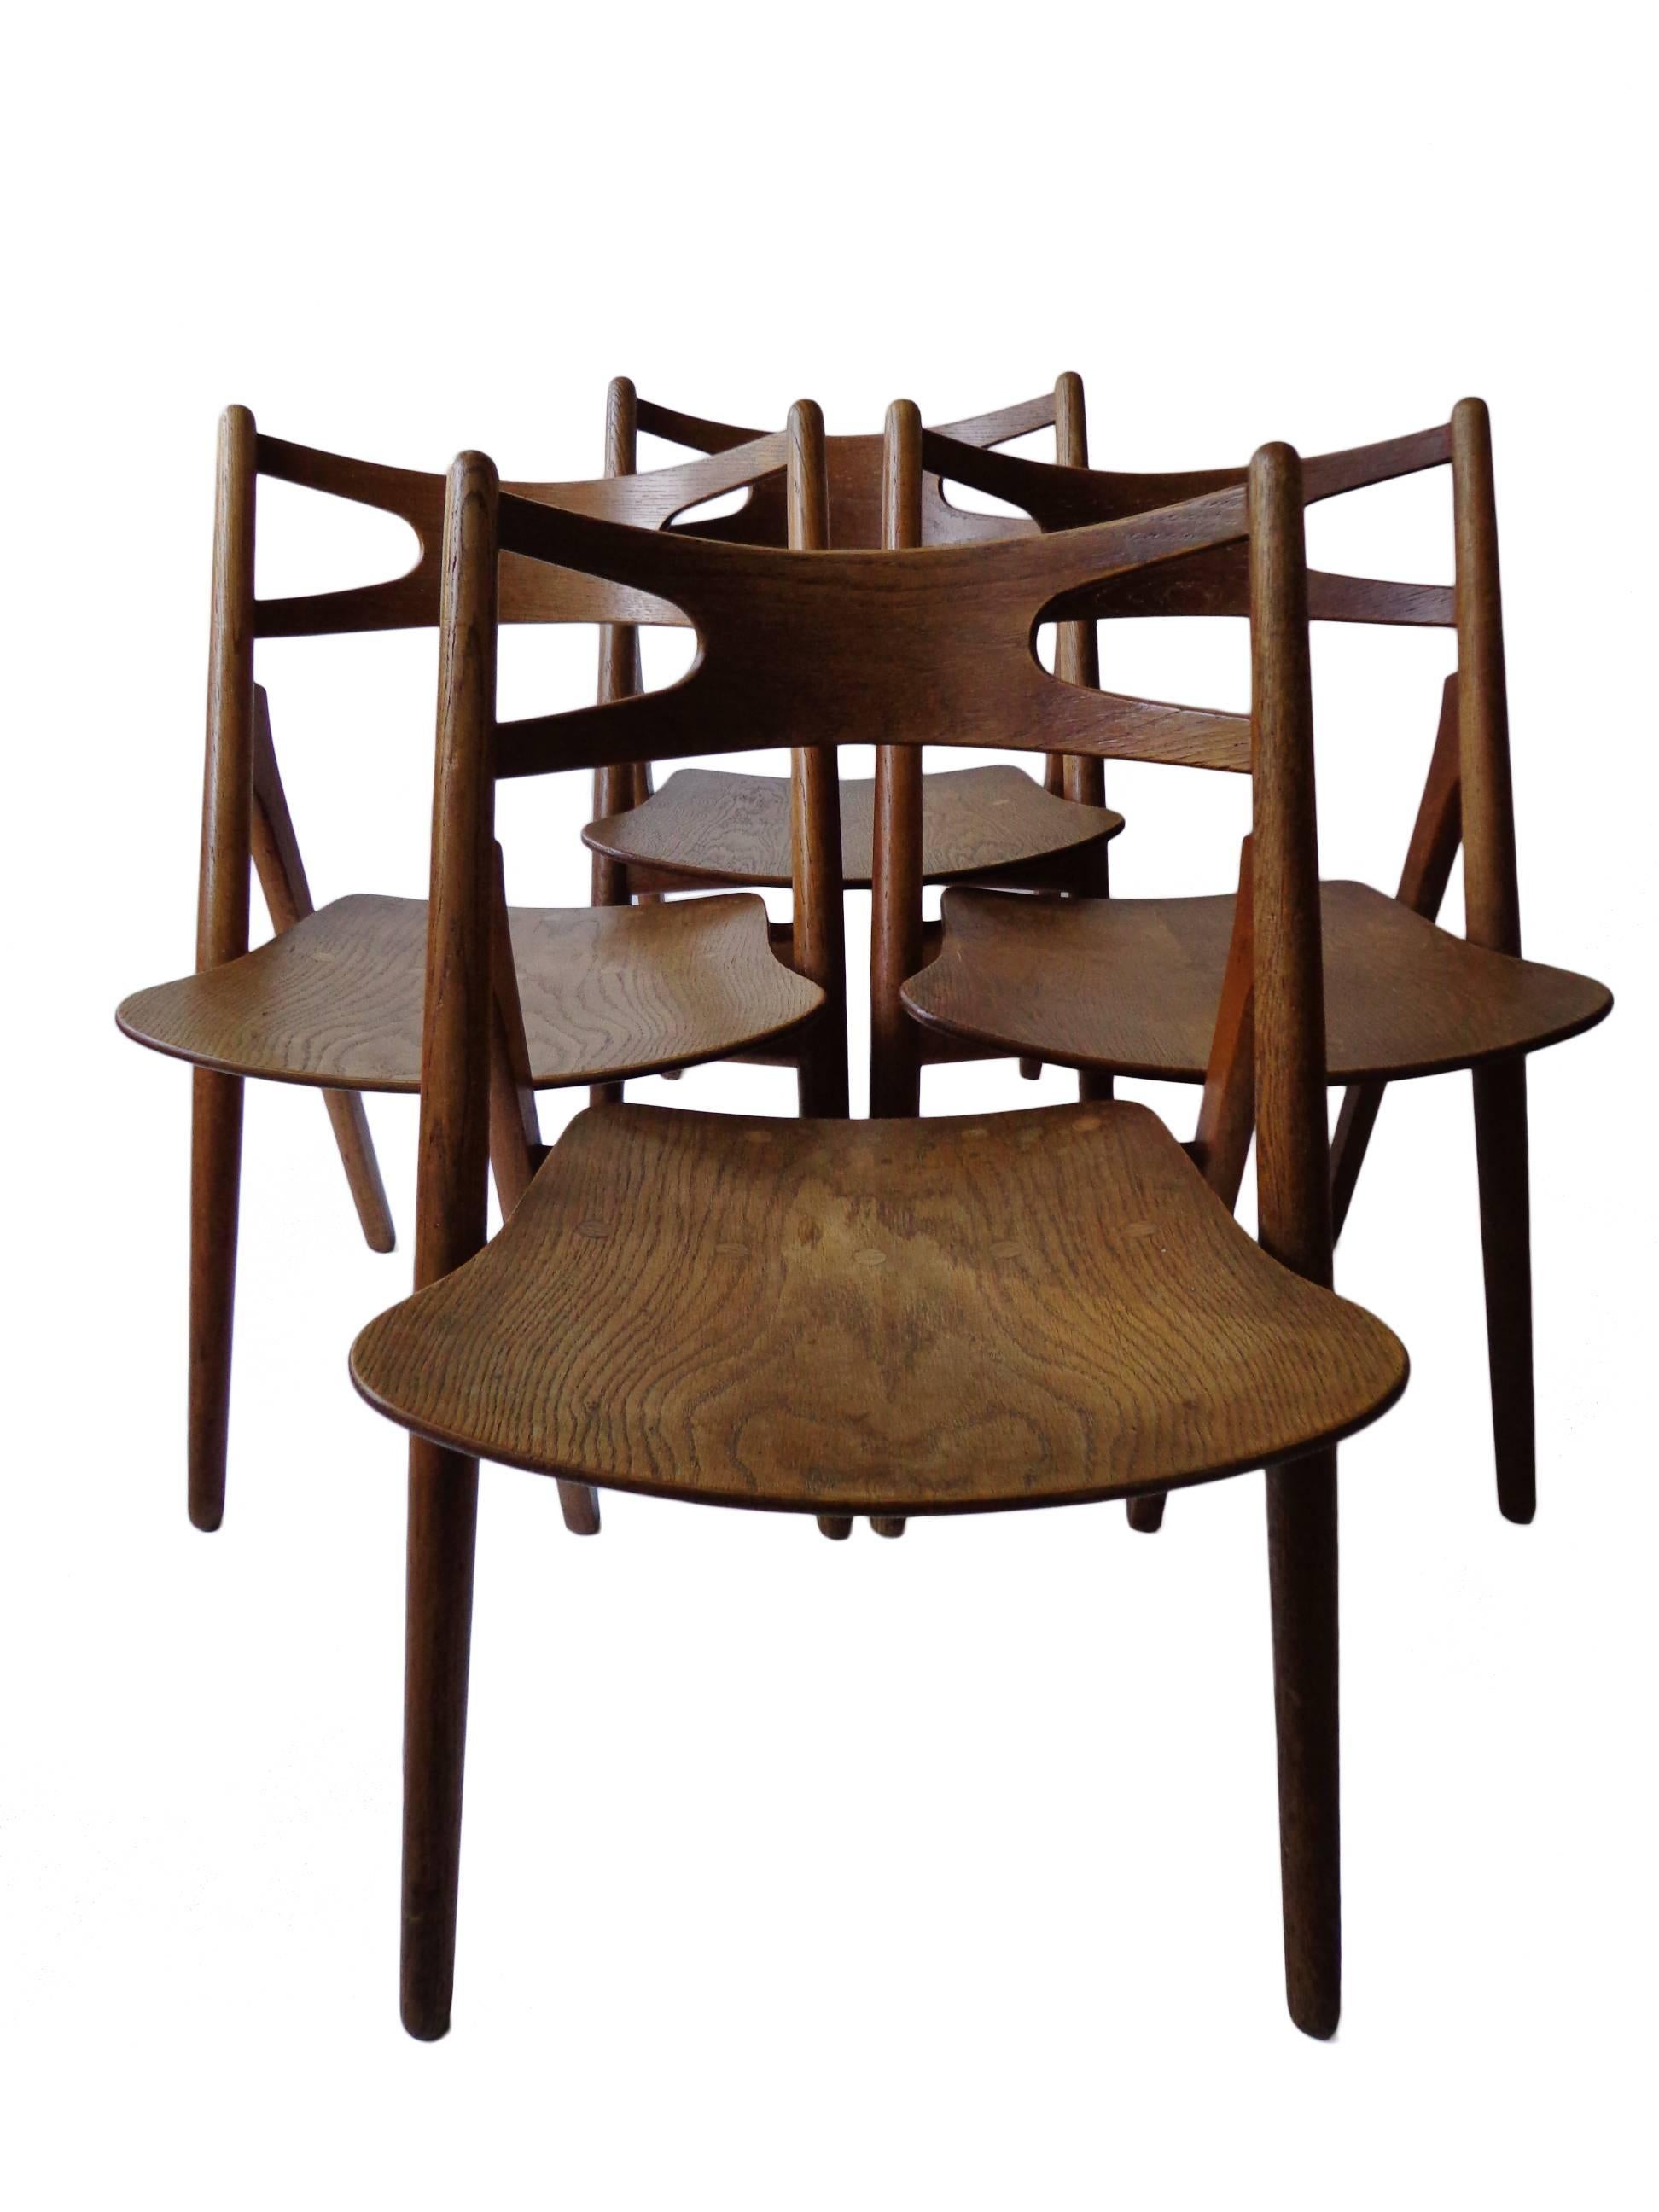 An extremely comfortable dining chairs with visible assembling's that, despite its appearance, is very stabile. The chair's design, which recalls that of a sawbuck.

Signed with branded manufacturer's mark to underside of each